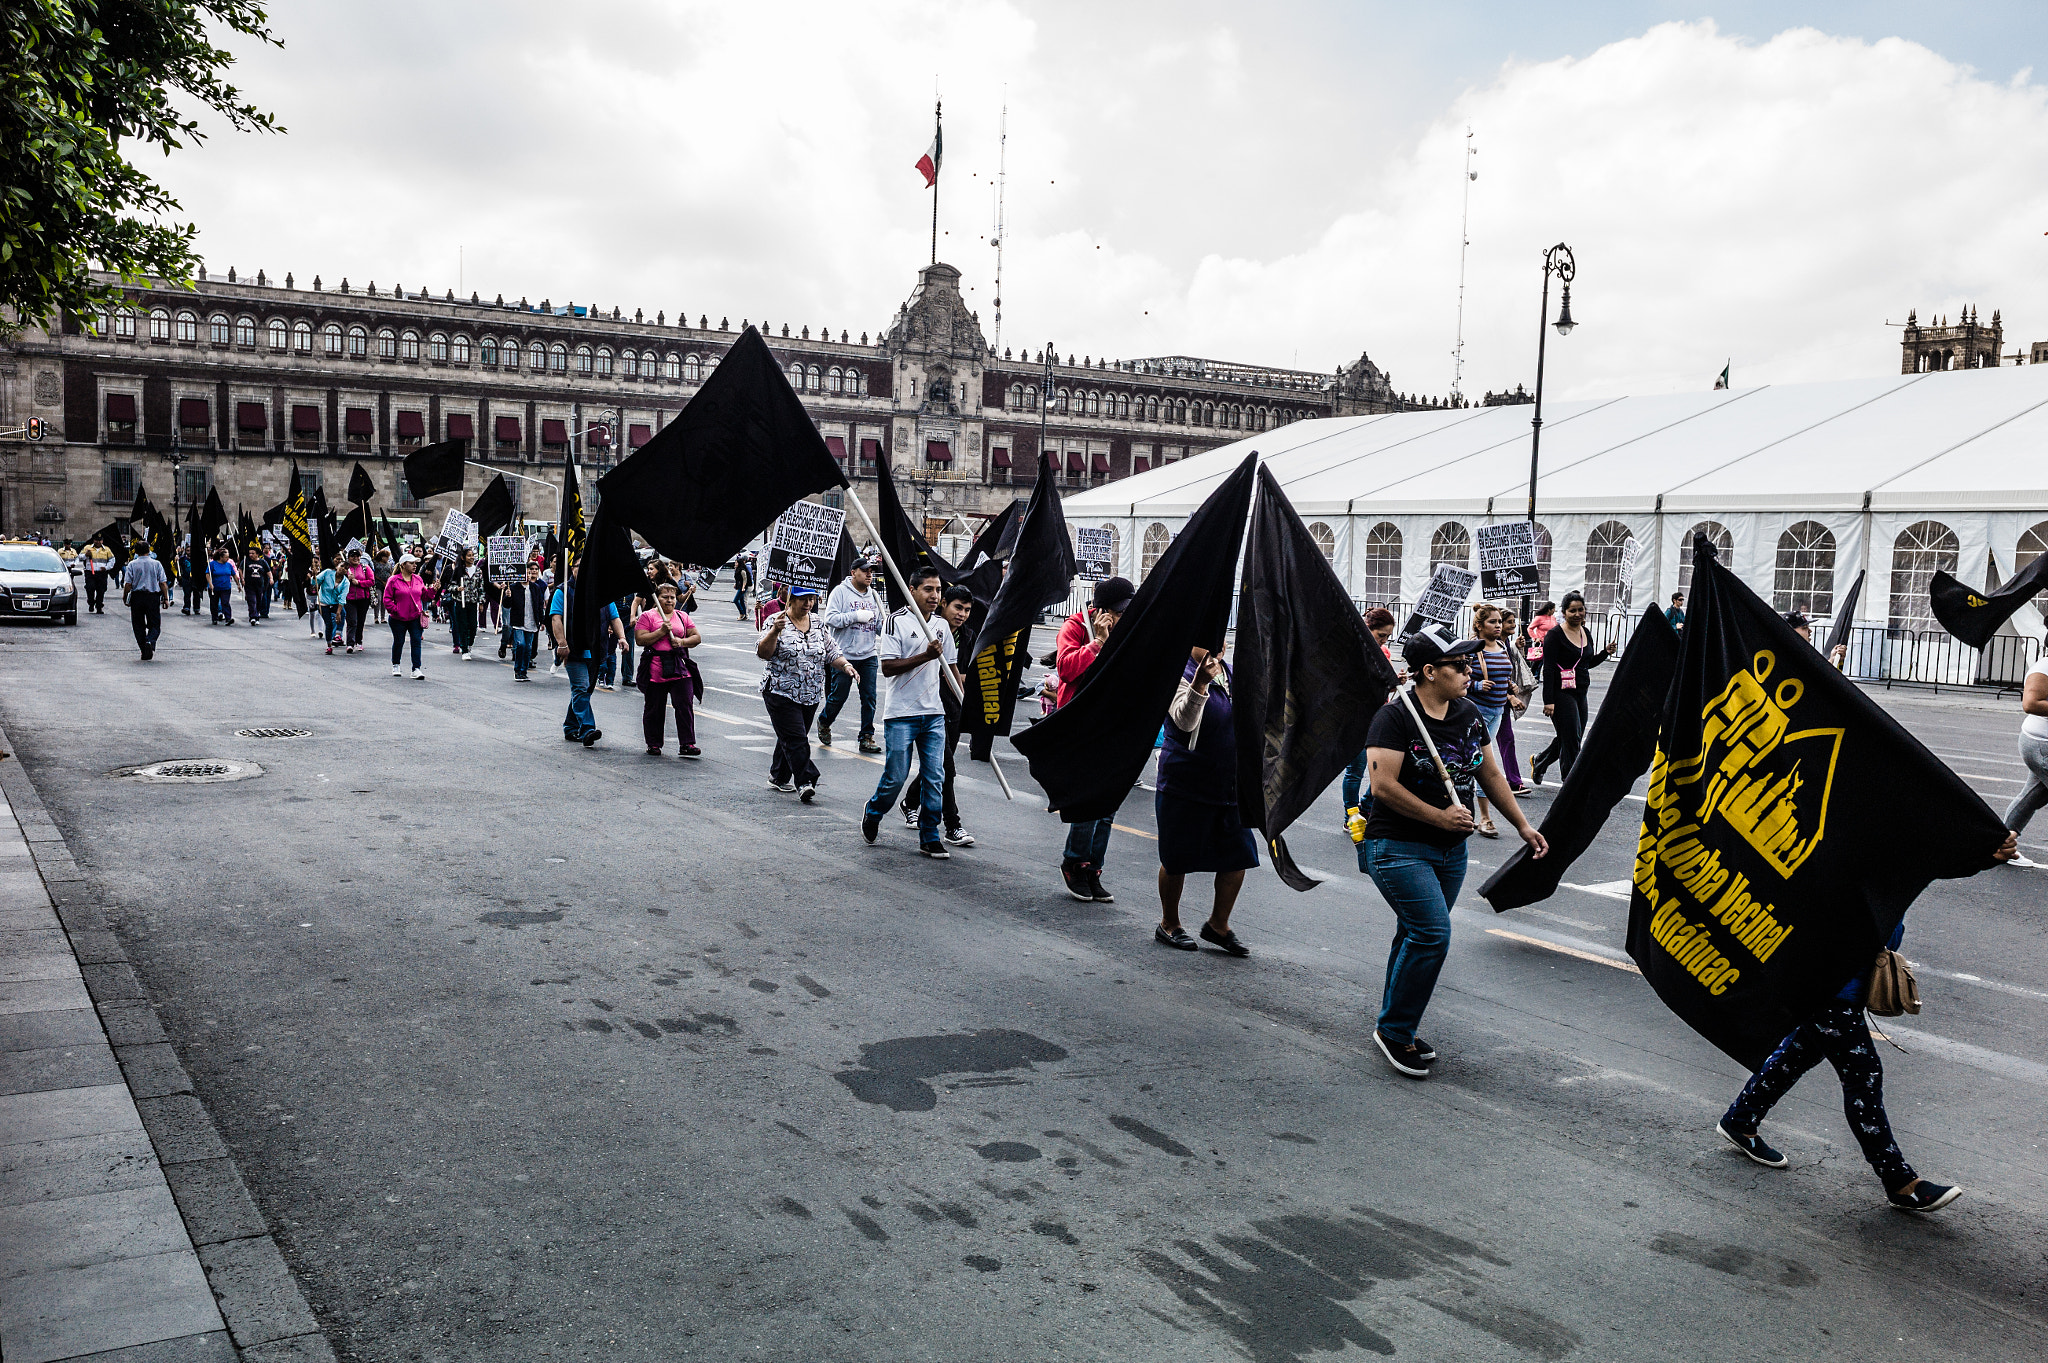 Elmarit-M 28mm f/2.8 (IV) sample photo. Protesters, zocalo mexico city, df photography